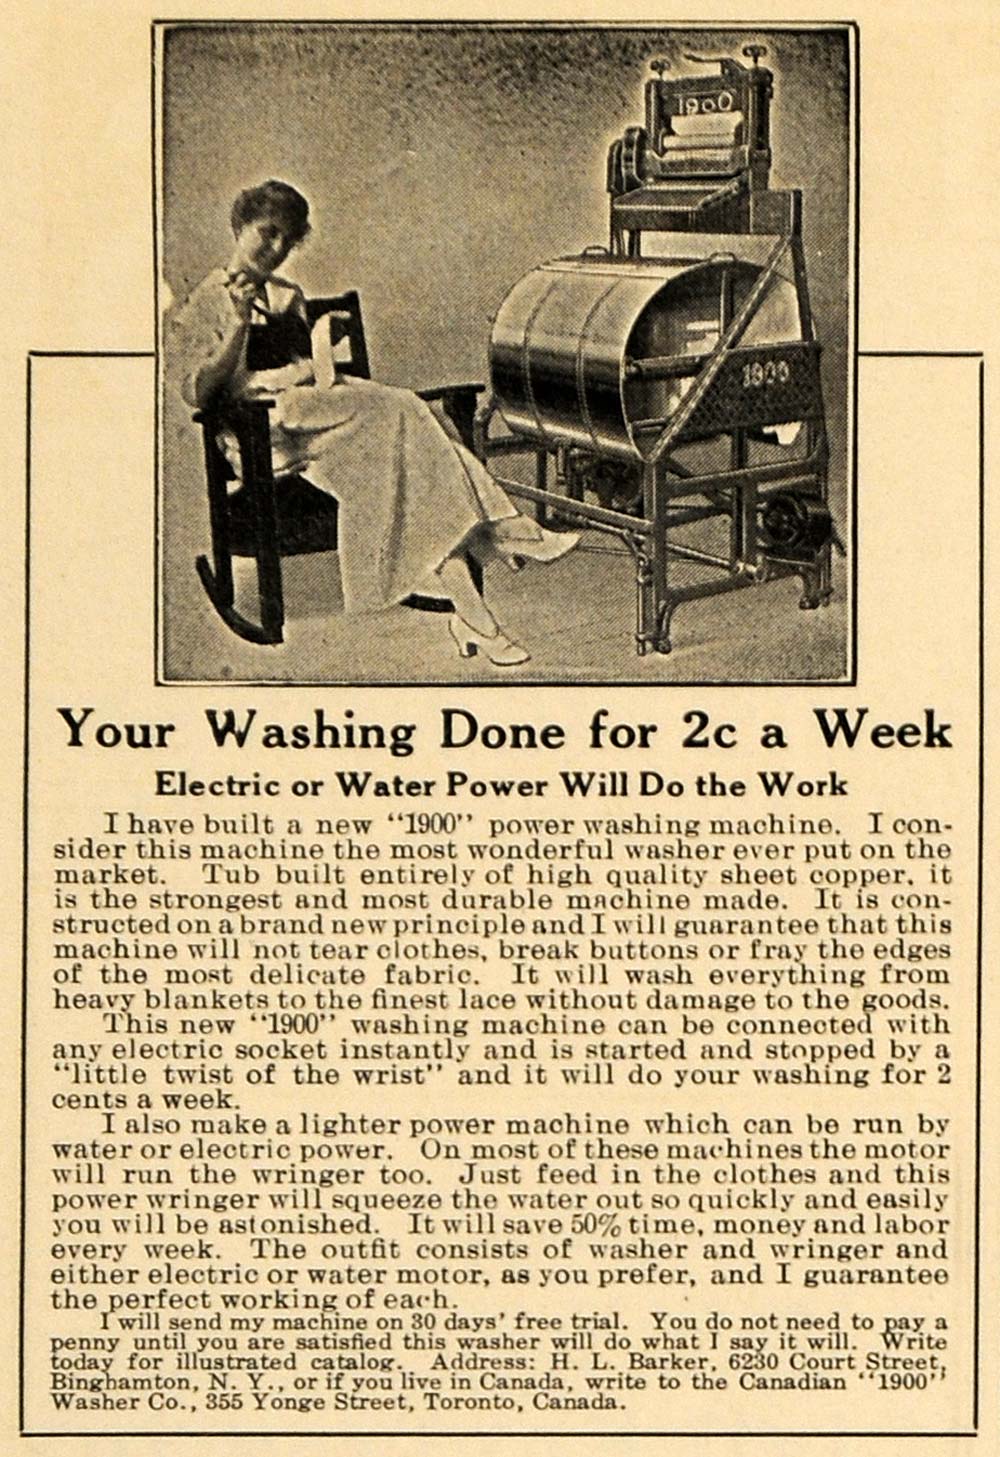 1916 Ad Washing Dry Machine Clothes Cleaning Household - ORIGINAL ILW1